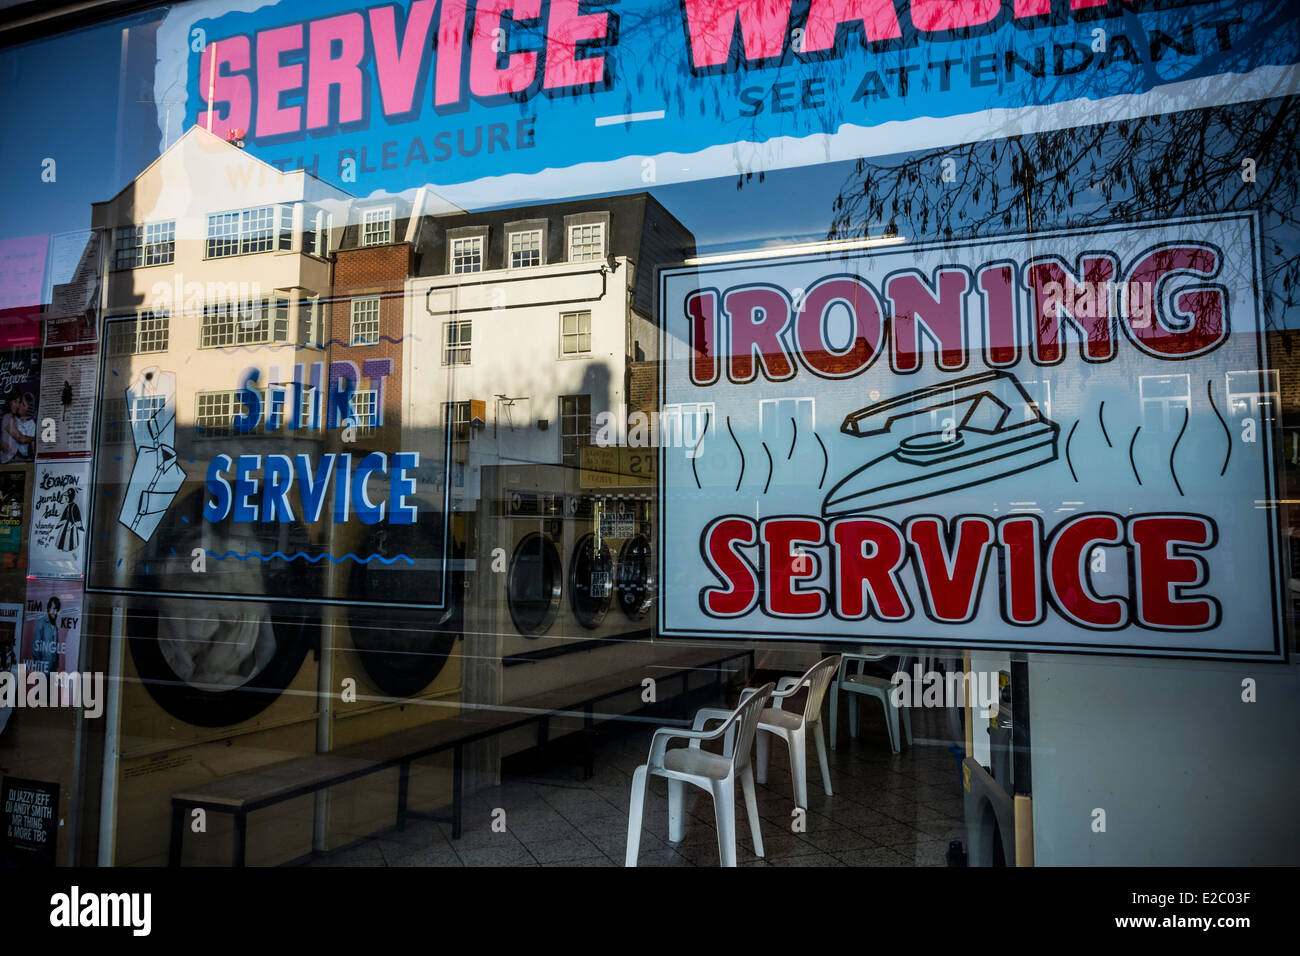 A self-service Launderette Holloway Road London Stock Photo